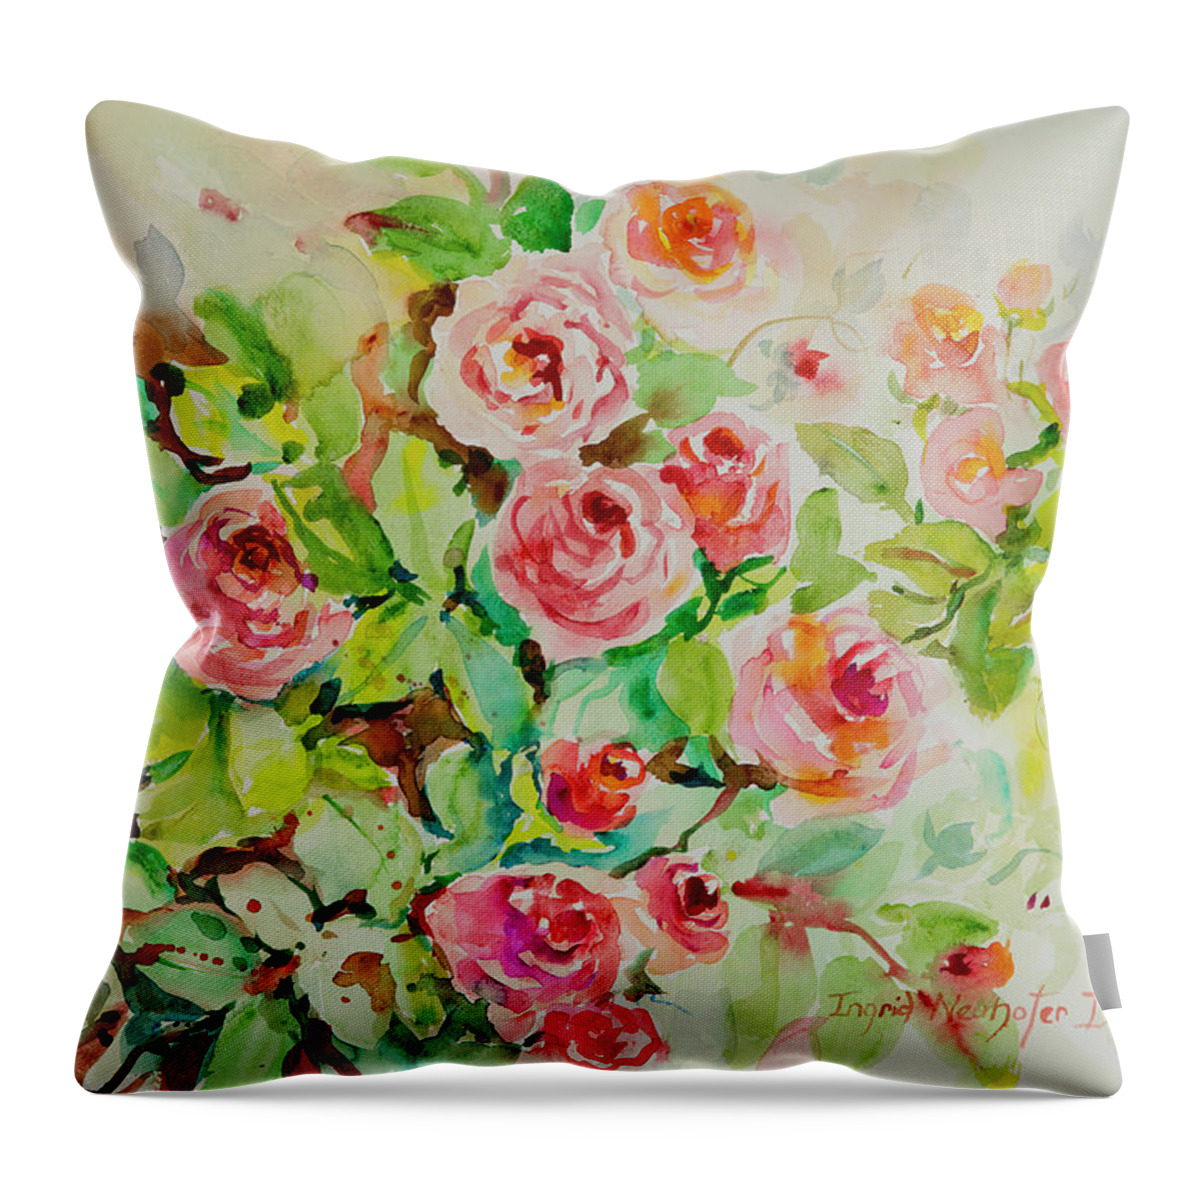 Floral Throw Pillow featuring the painting Watercolor Series 202 by Ingrid Dohm